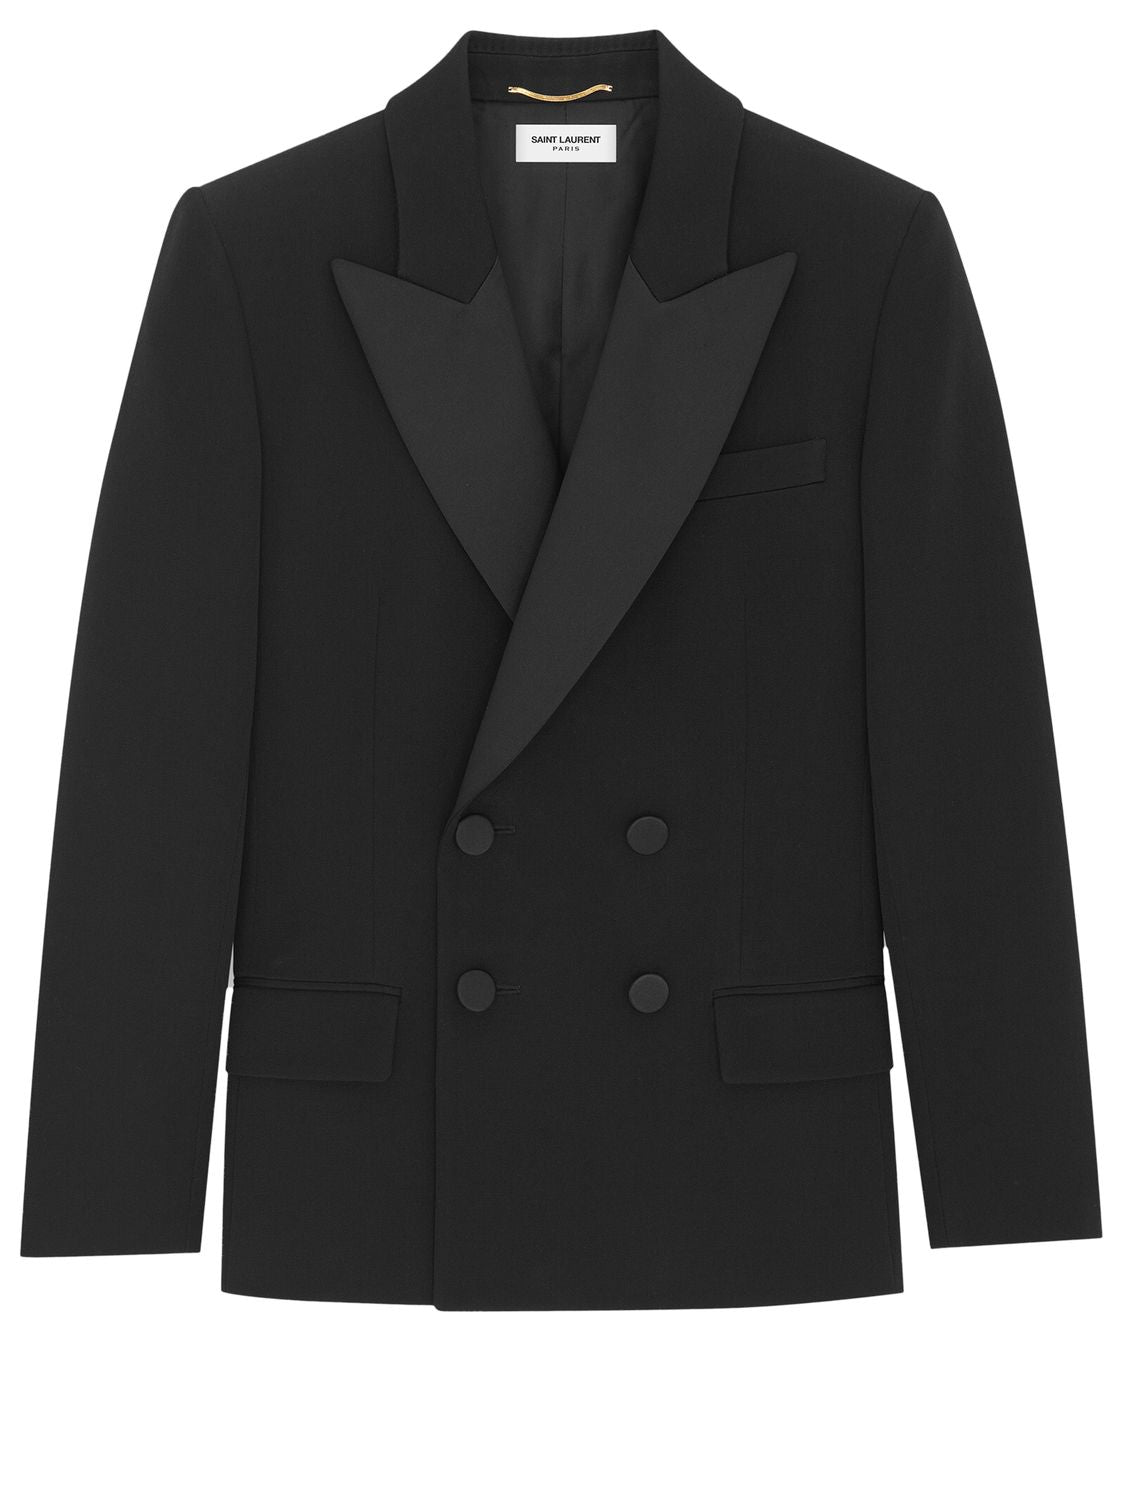 SAINT LAURENT Sophisticated Double Breasted Blazer for Women in Classic Black